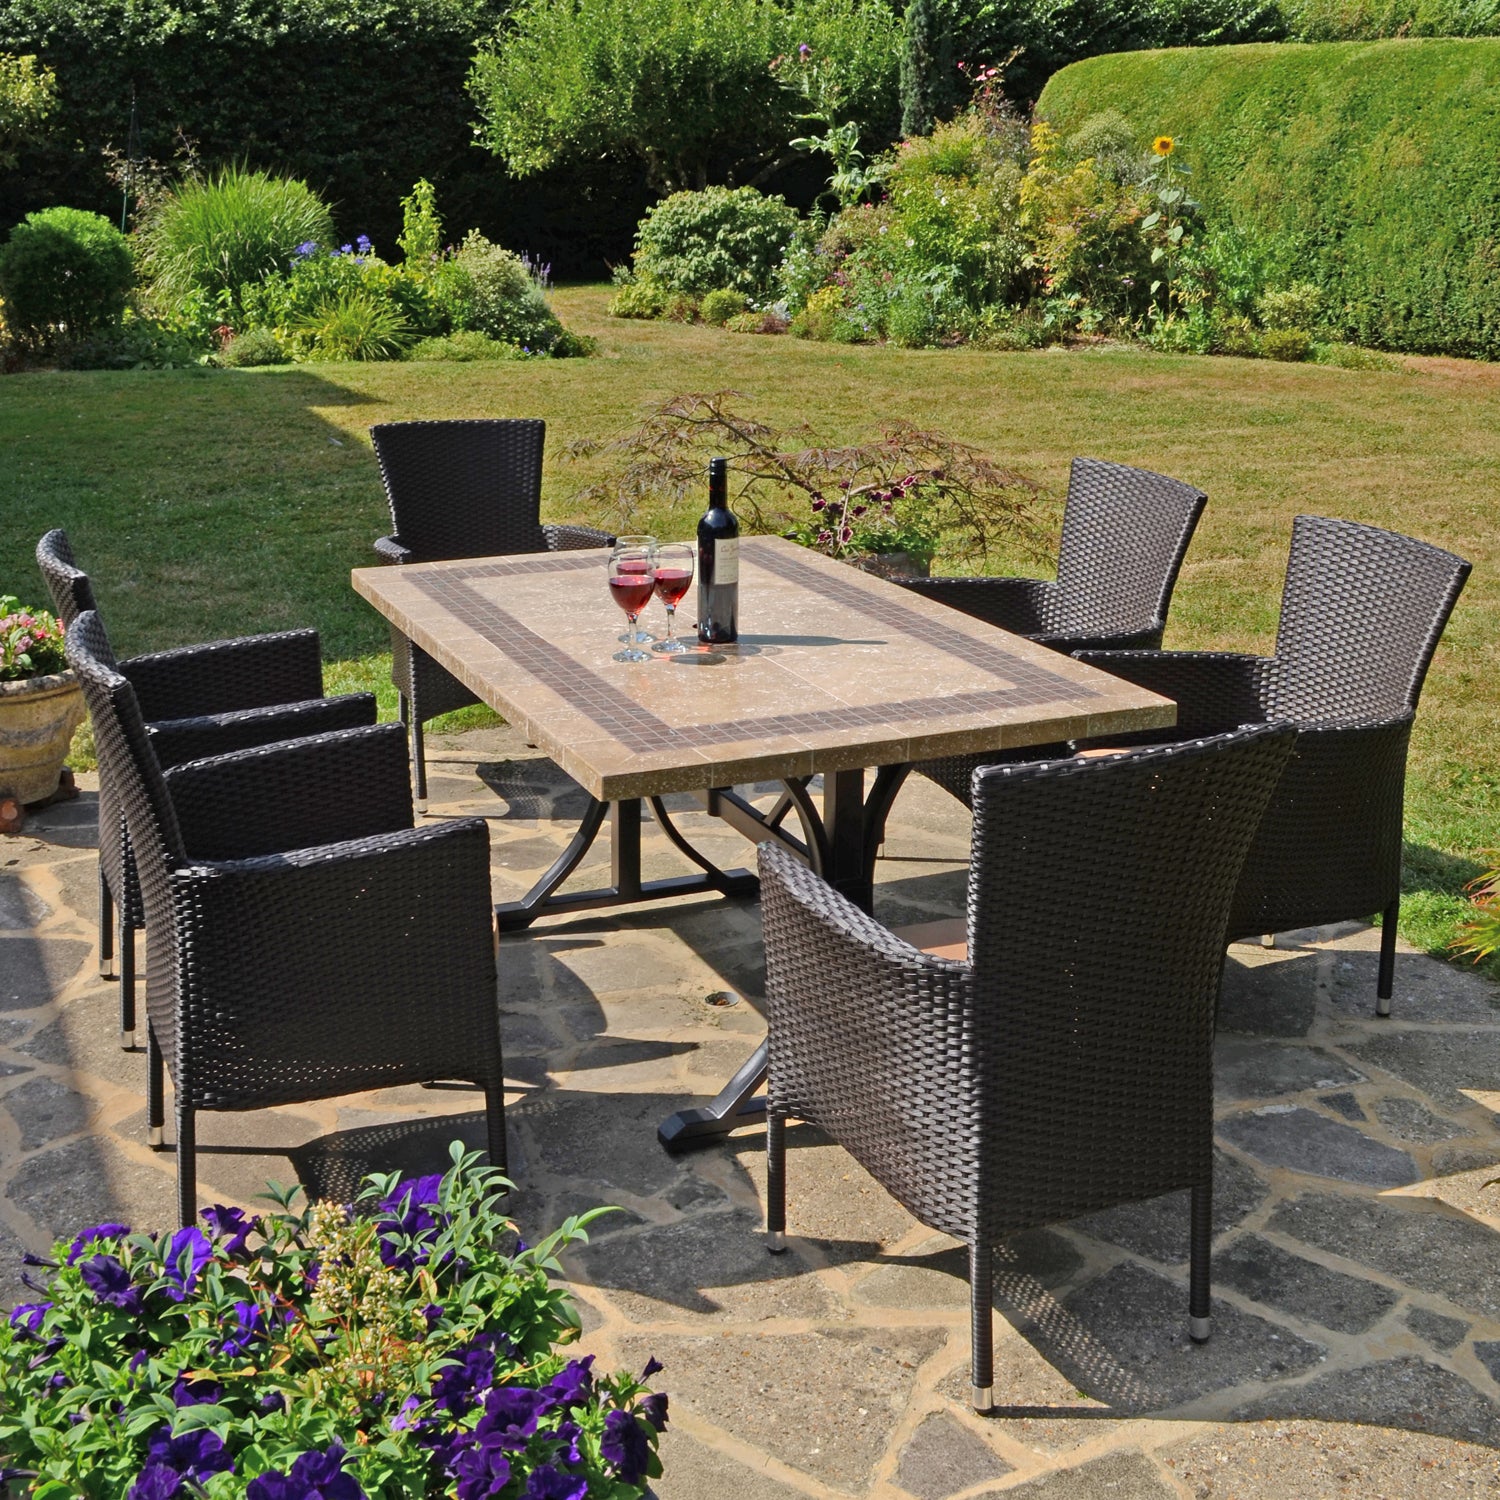 Byron Manor Charleston Stone Garden Dining Table with 6 Stockholm Wicker Brown Chairs Dining Sets Byron Manor   